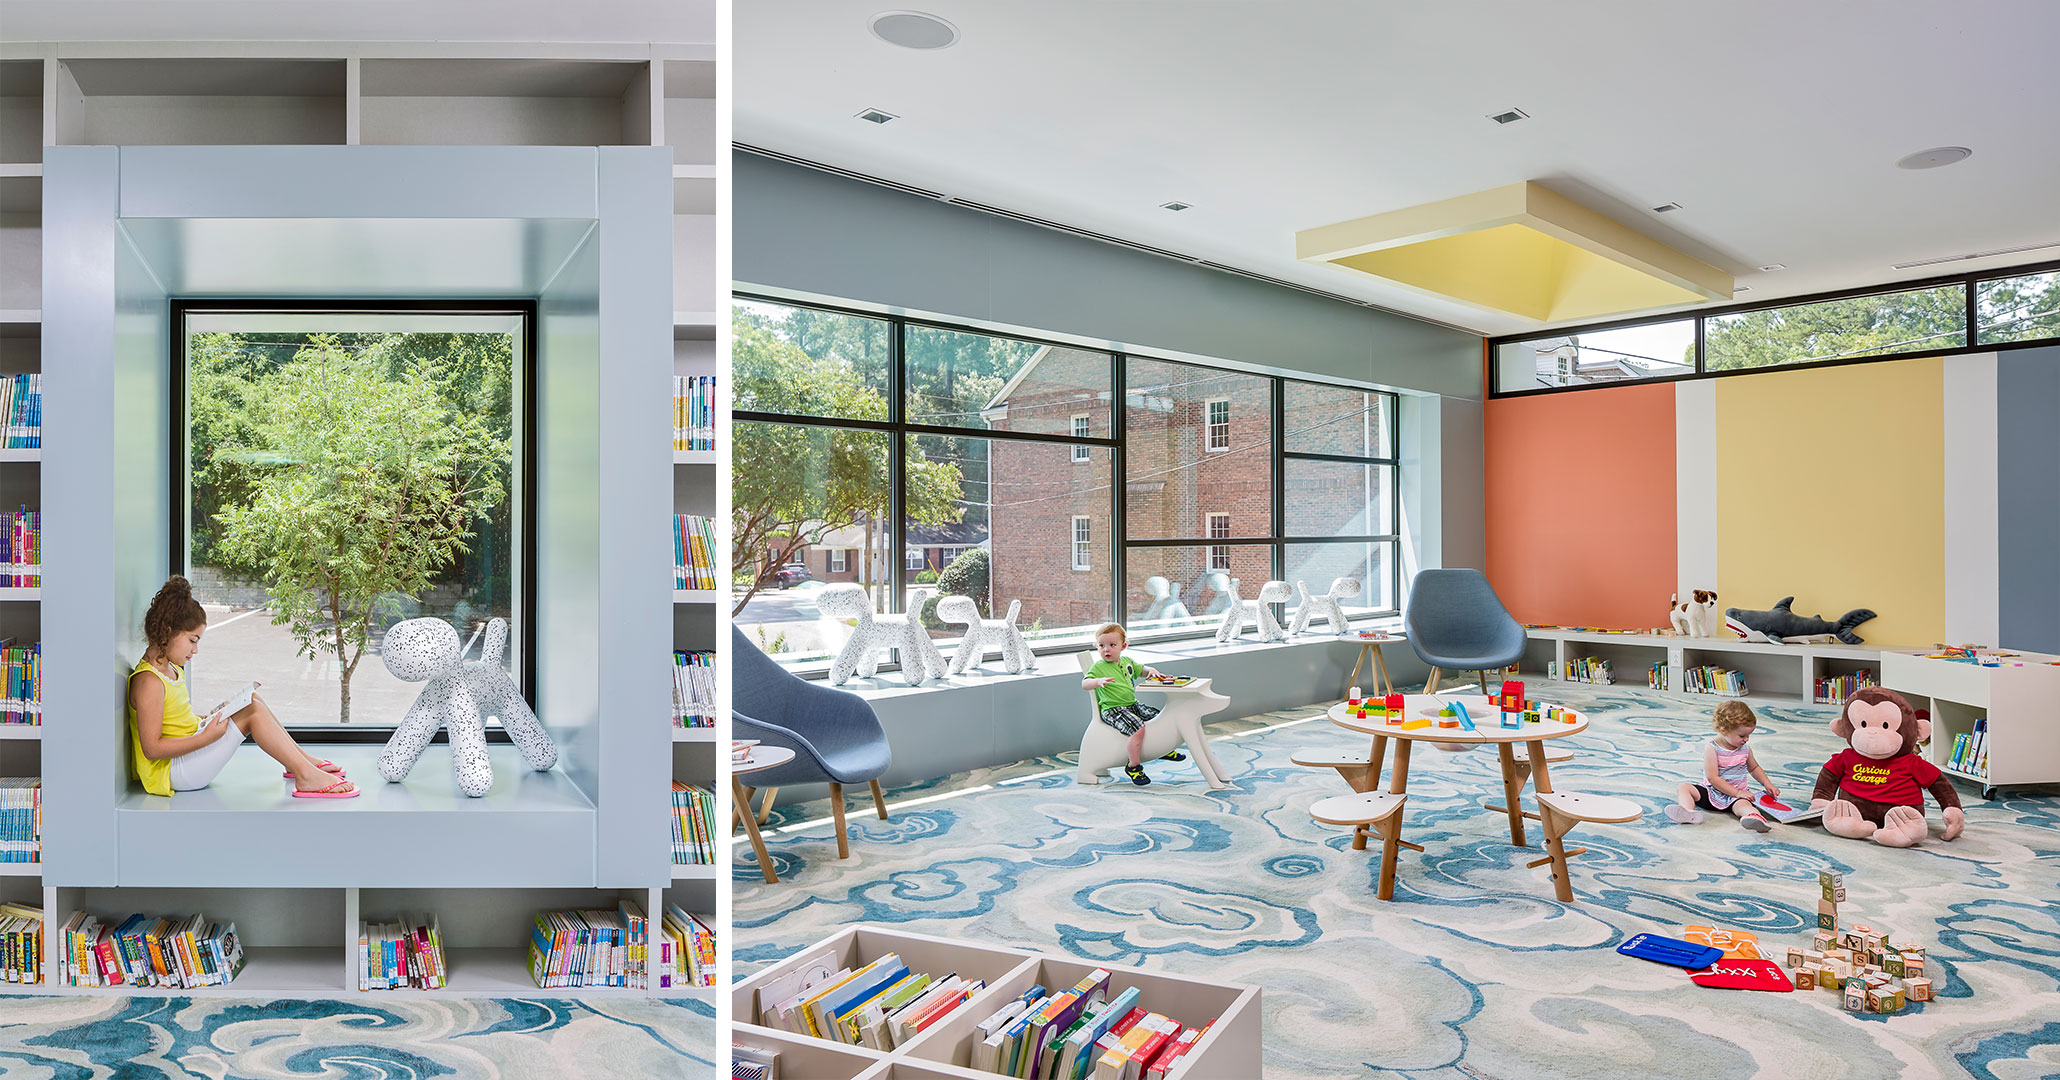 Richland County Library worked with Boudreaux architects to design flexible spaces.